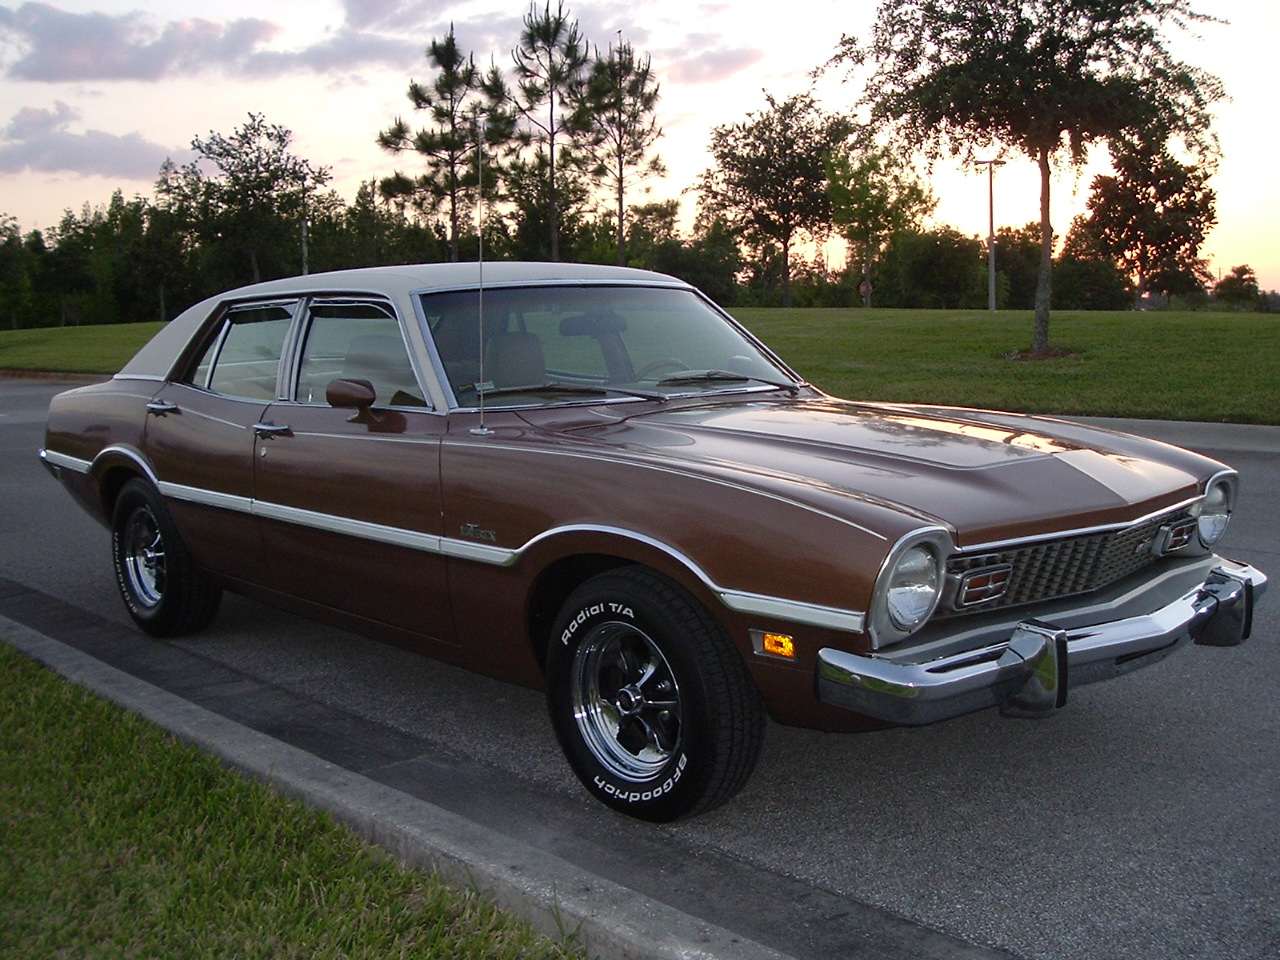 Ford maverick owners forum #8